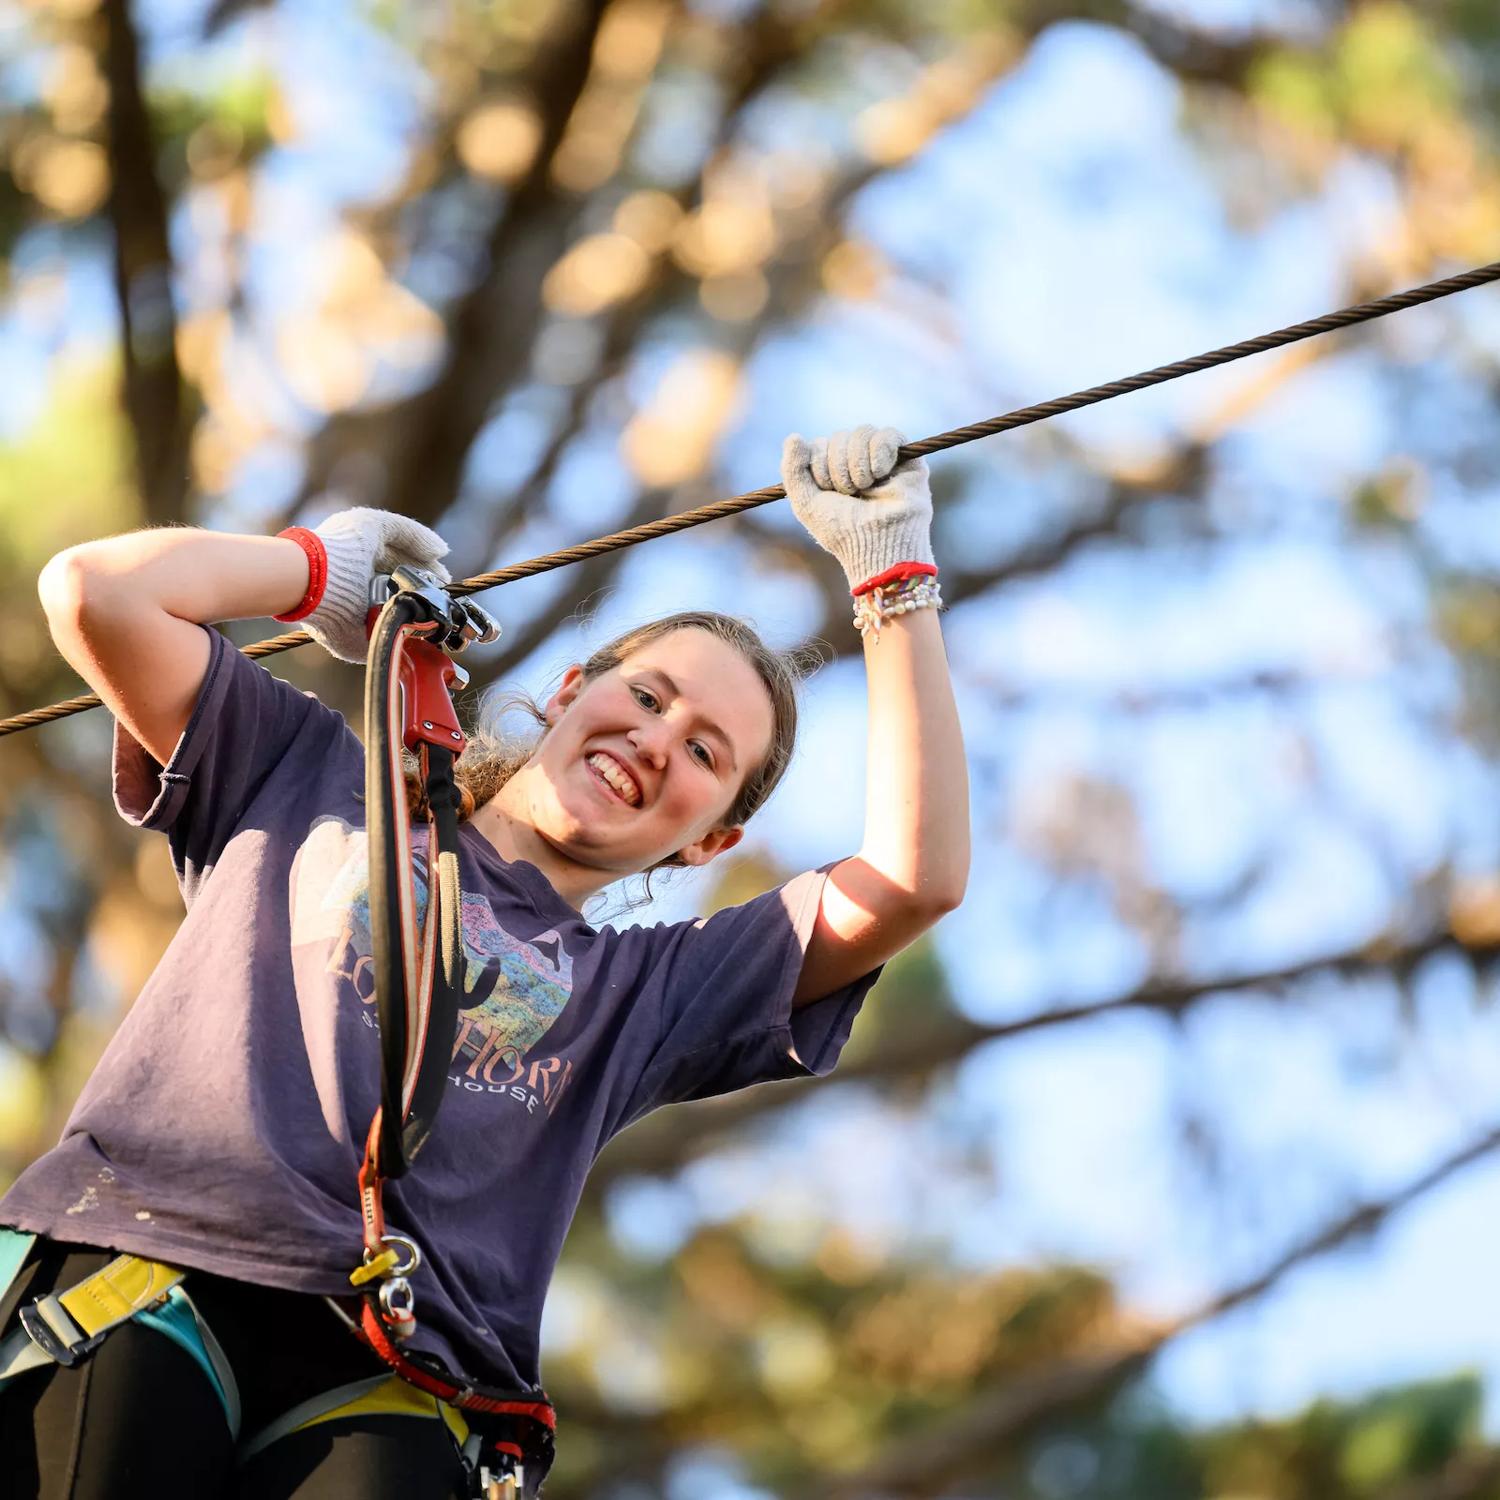 A child on a zipline amongst the trees at Adrenalin Forest.